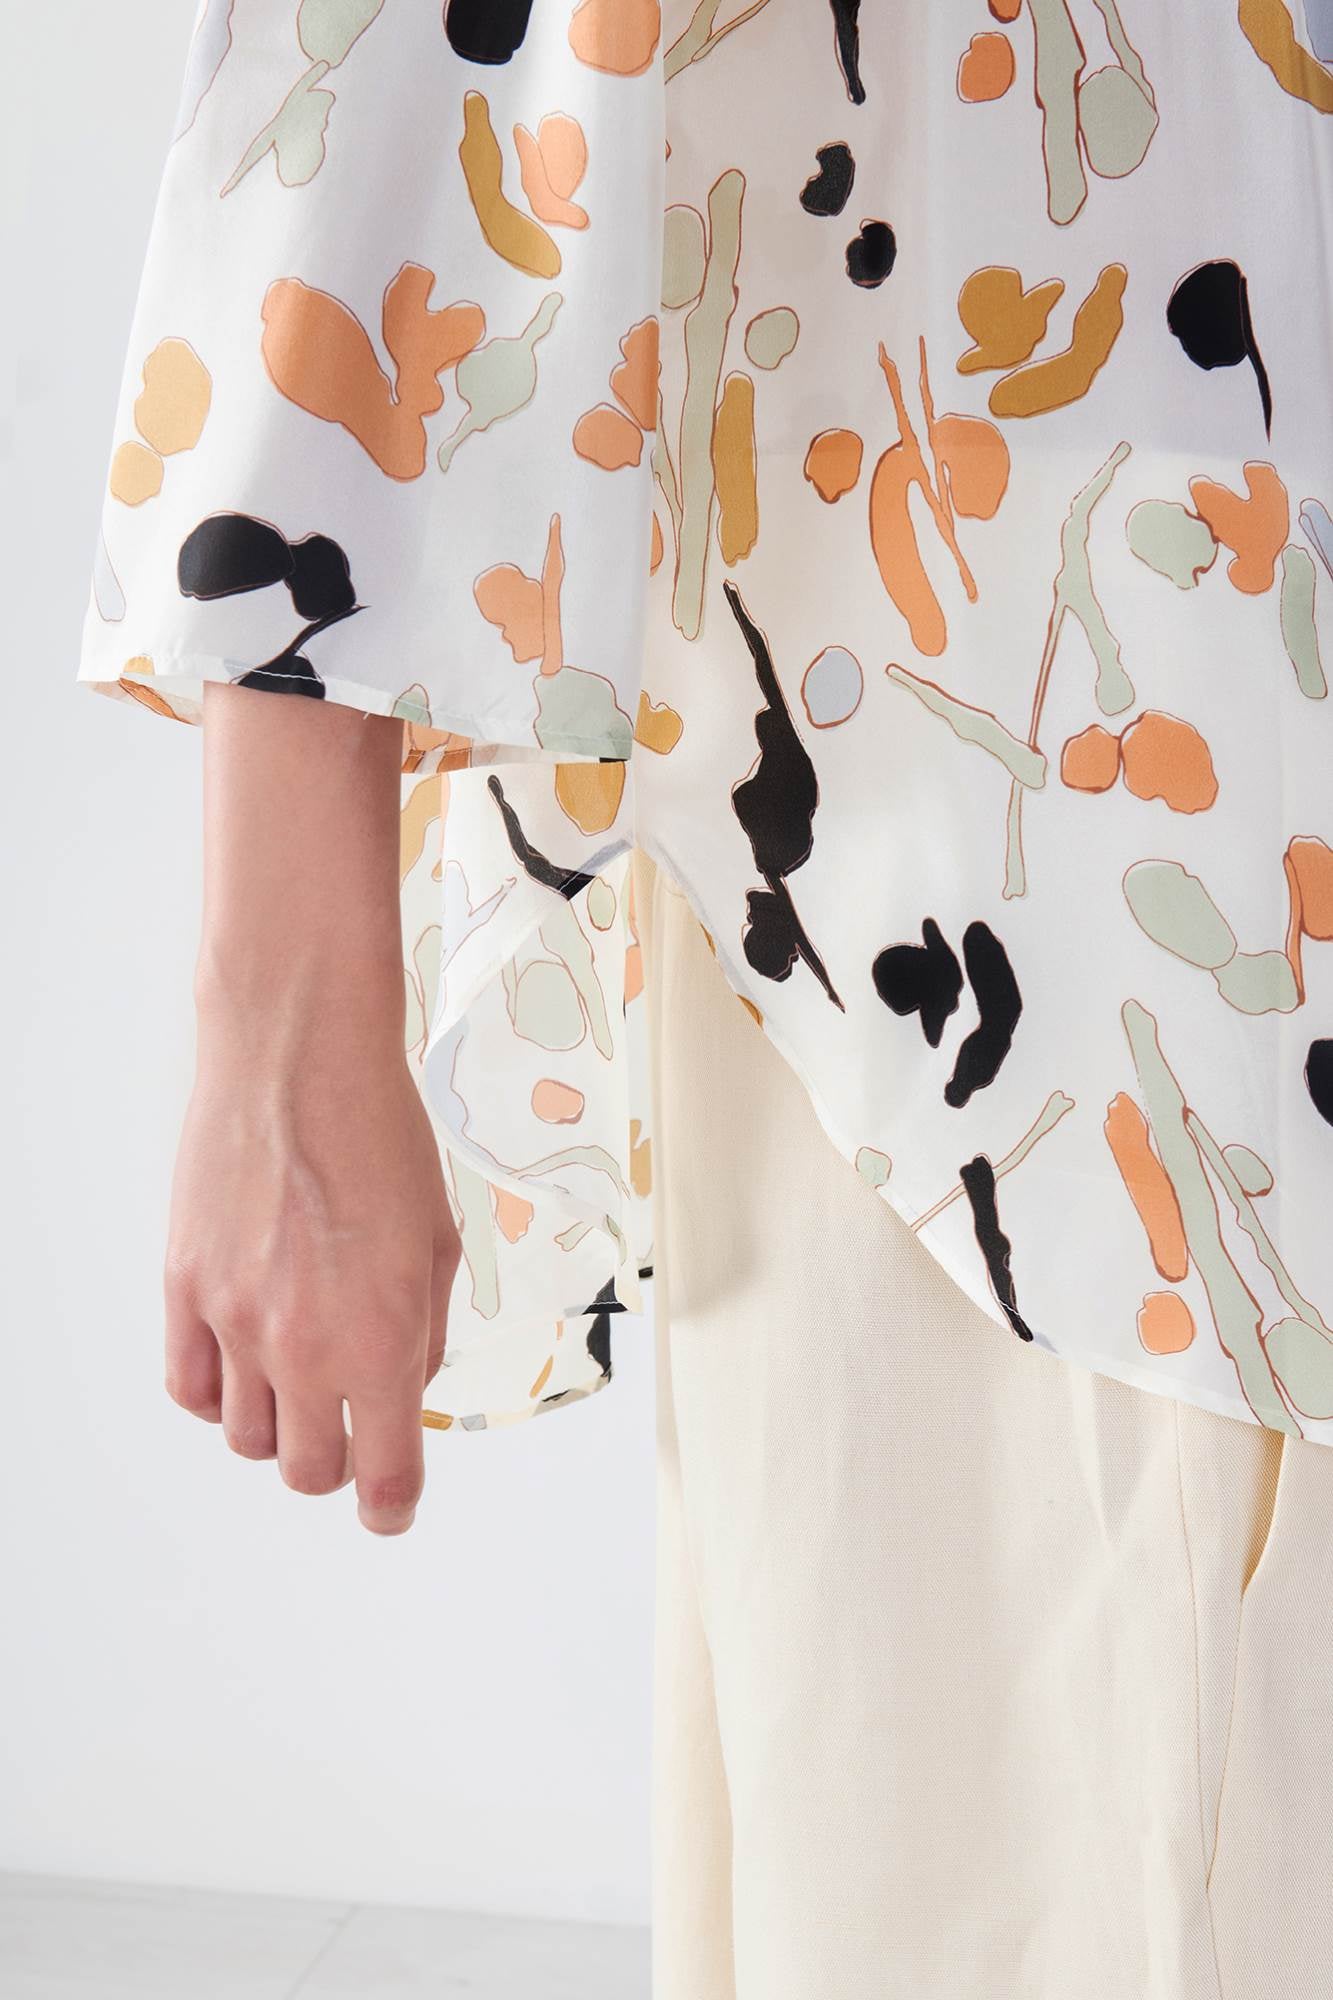 Slip-on blouse with “Silk Drops” print